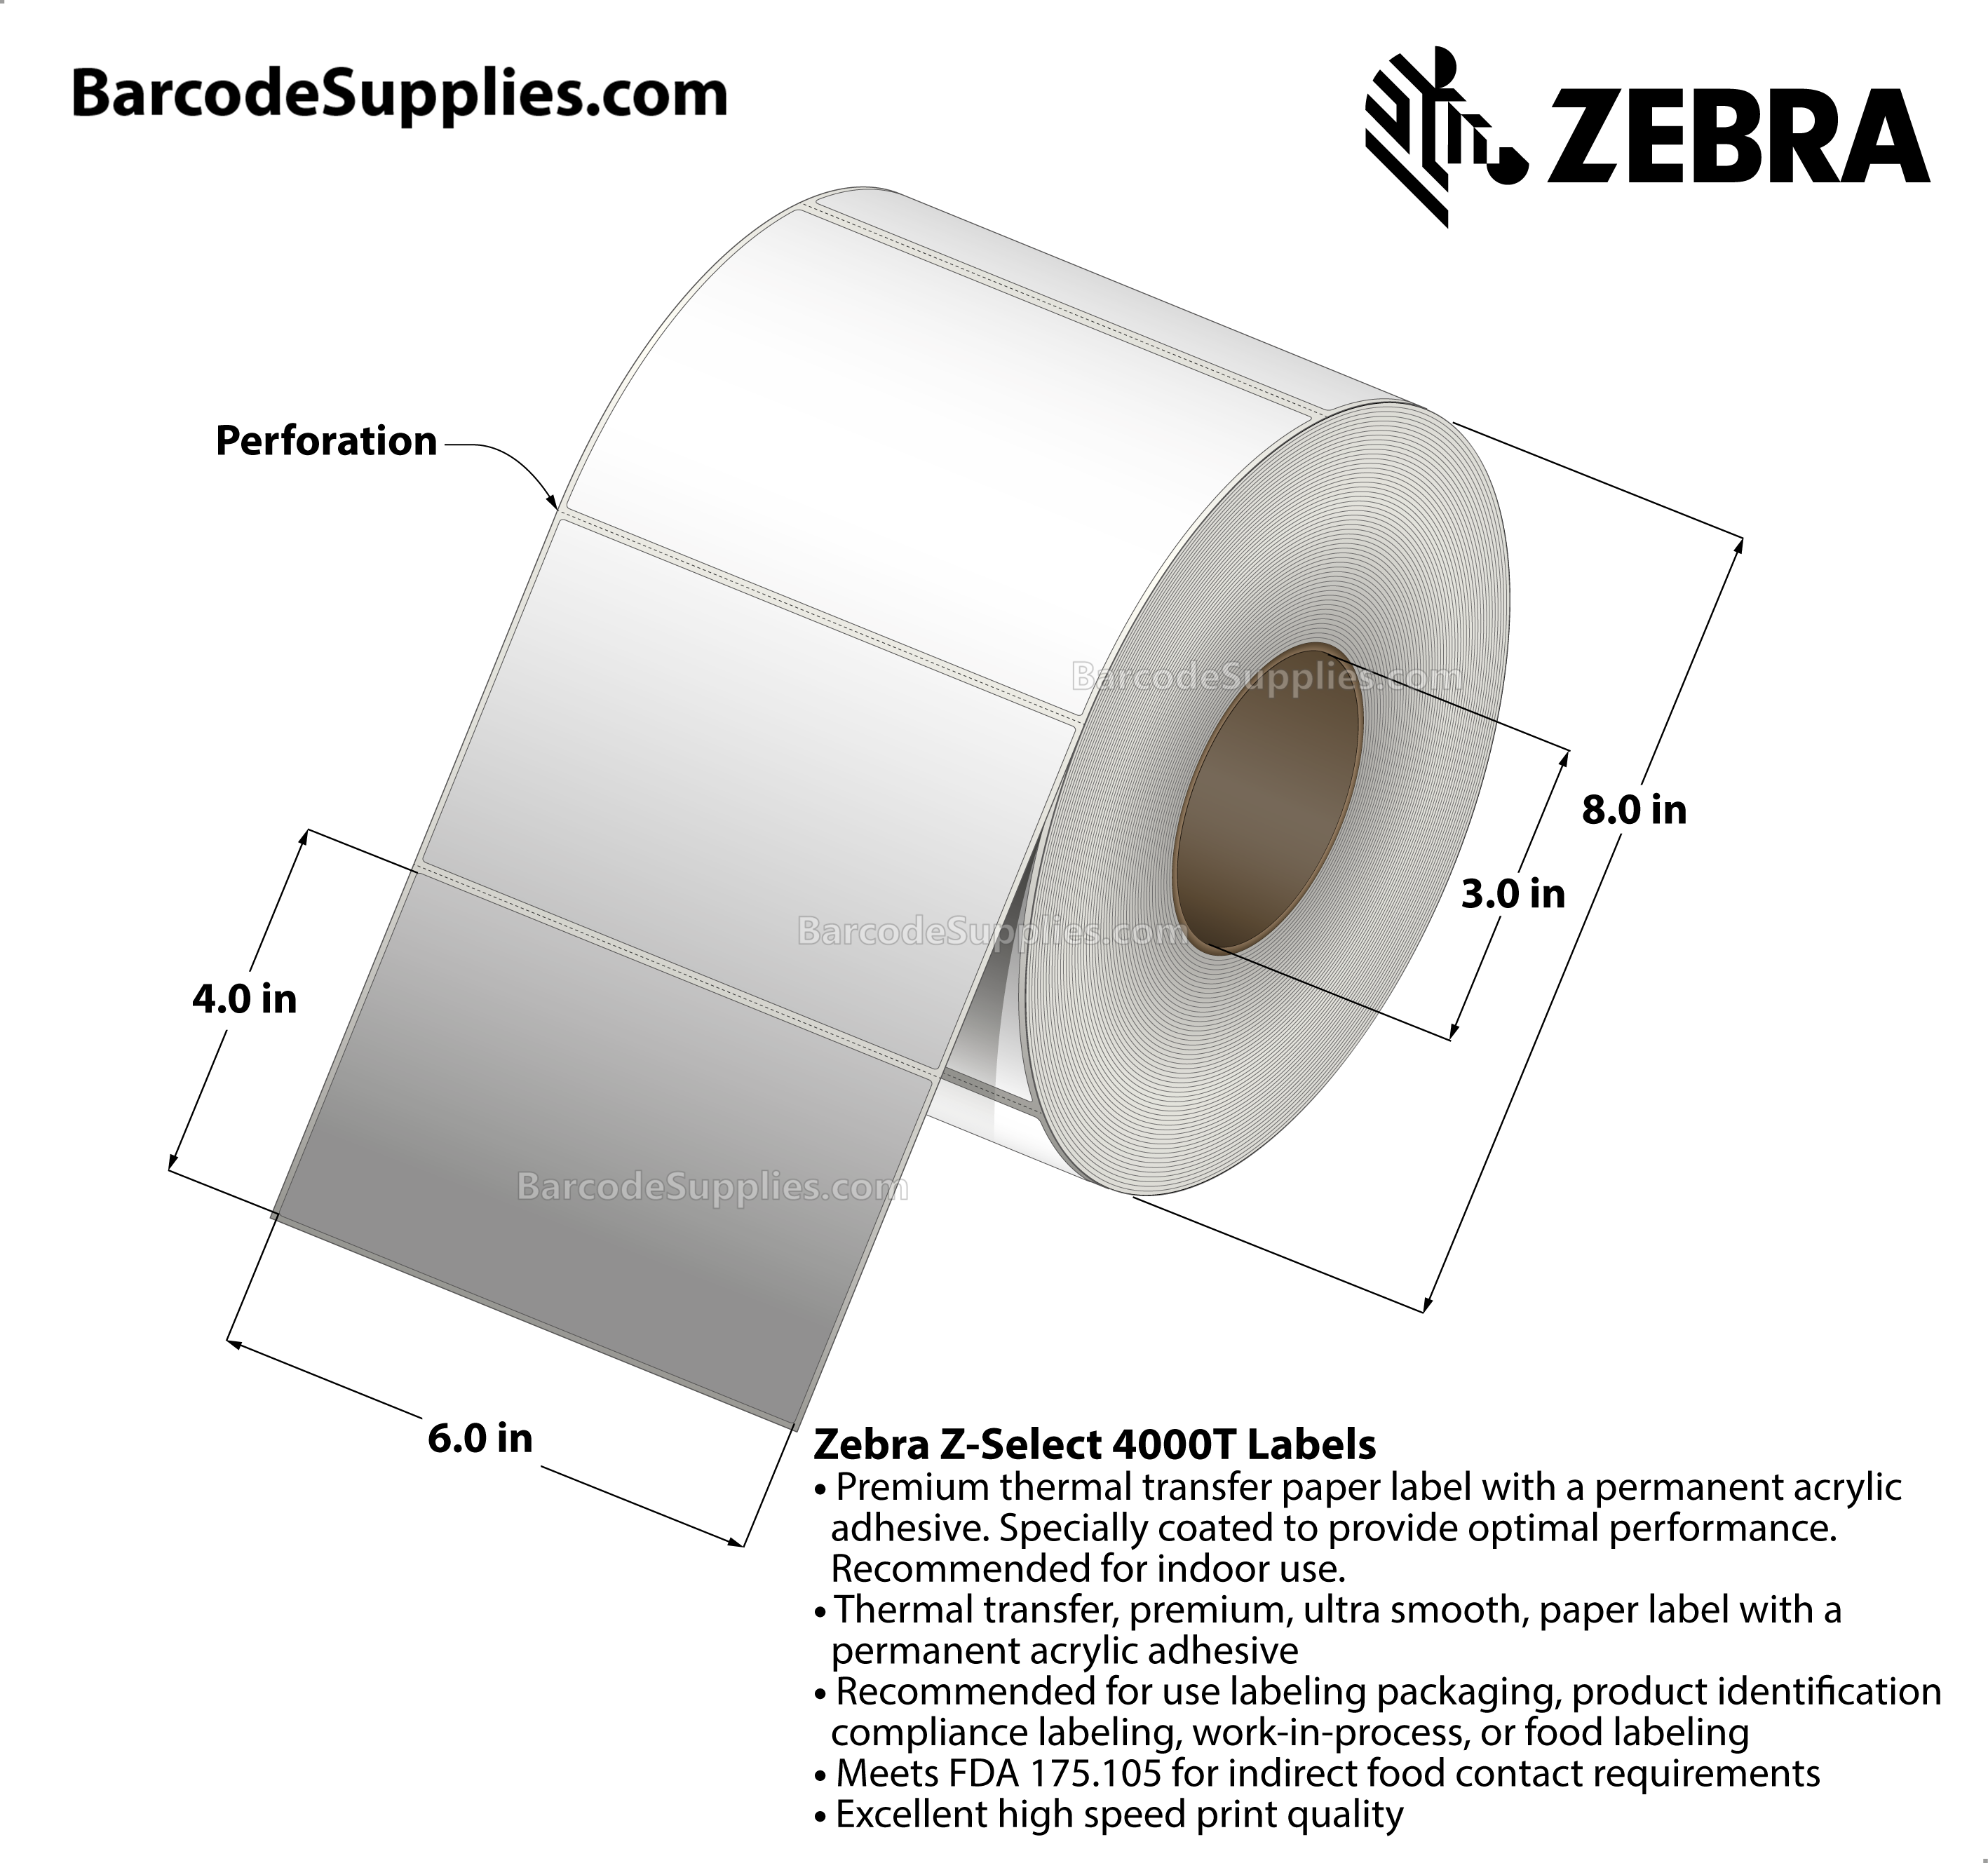 6 x 4 Thermal Transfer White Z-Select 4000T Labels With Permanent Adhesive - Perforated - 1360 Labels Per Roll - Carton Of 2 Rolls - 2720 Labels Total - MPN: 73909